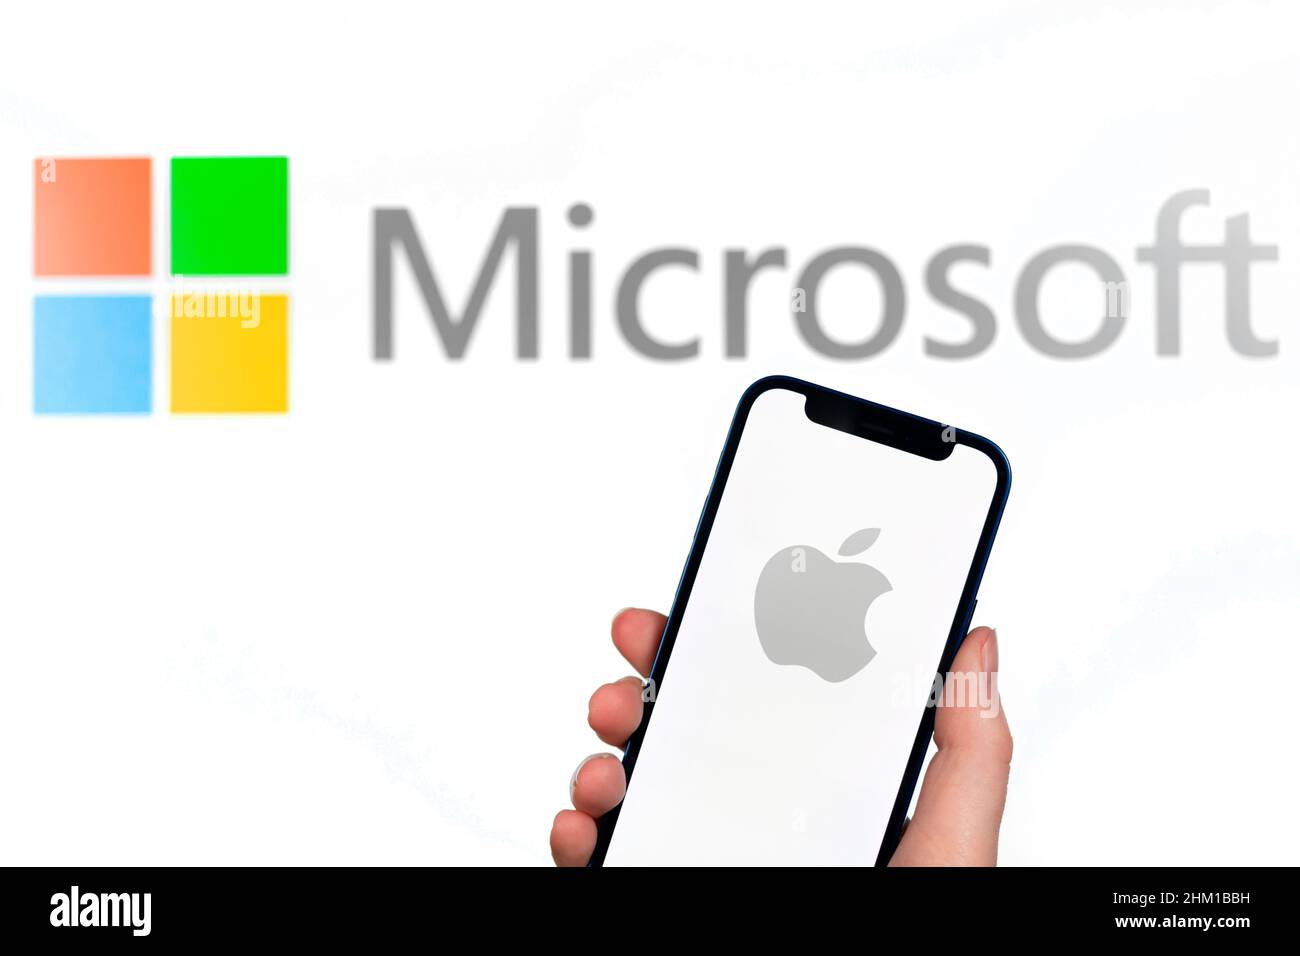 Apple and Microsoft logo. Hand with mobile phone, business concept photo Stock Photo